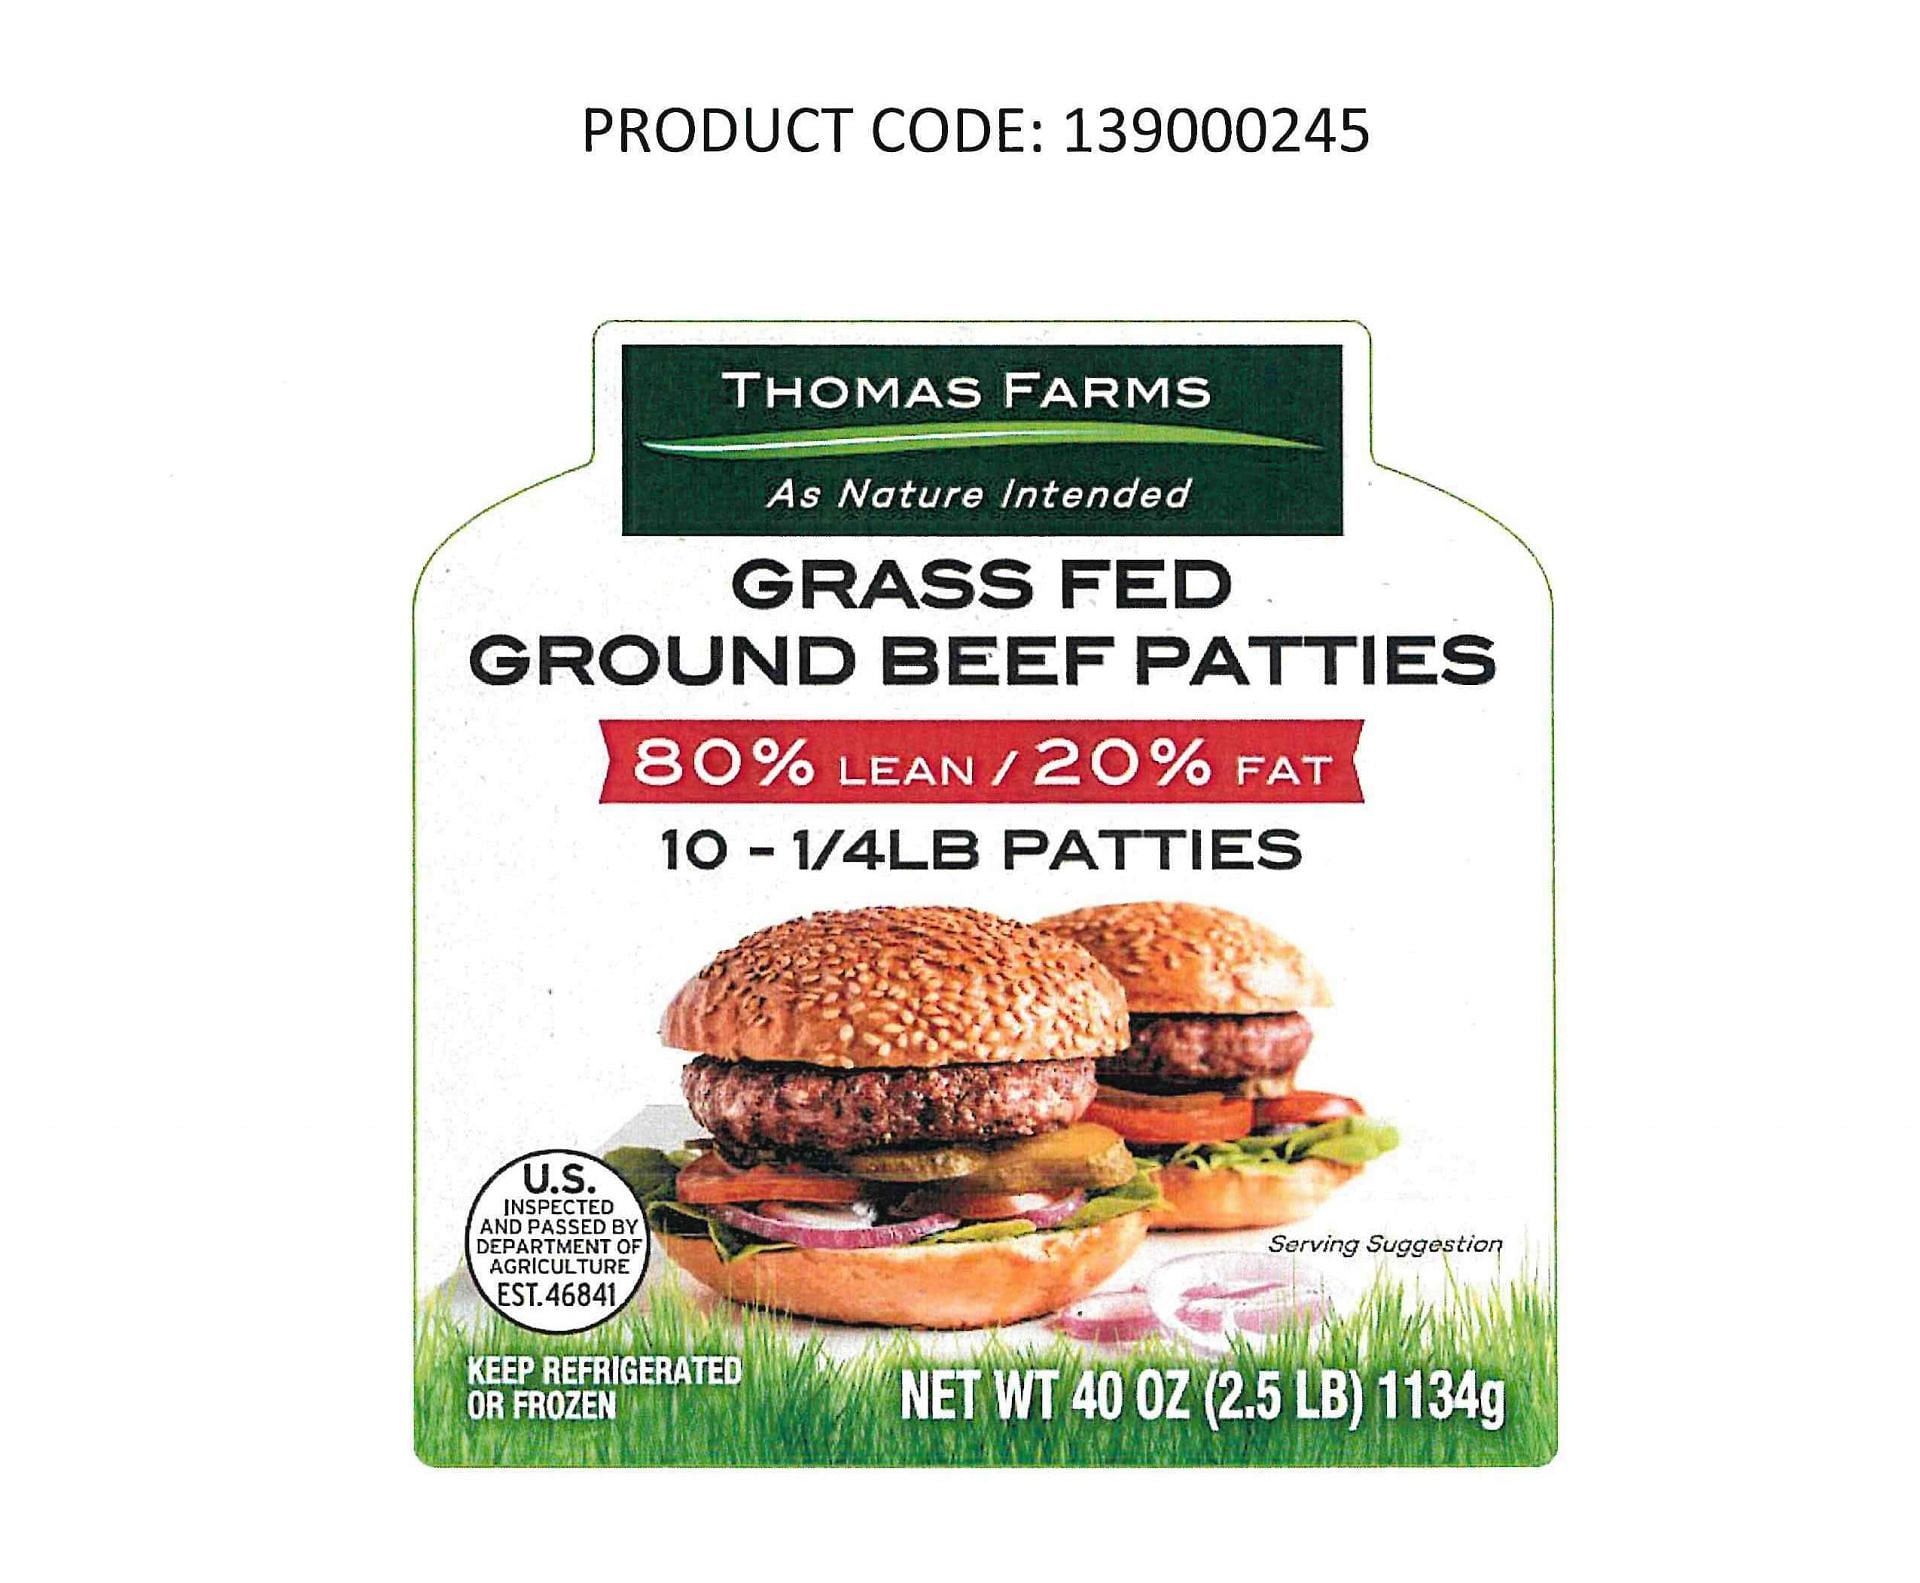 Ground beef products from Lakeside Refrigerated Services are recalled (Image via Lakeside Refrigerated Services)